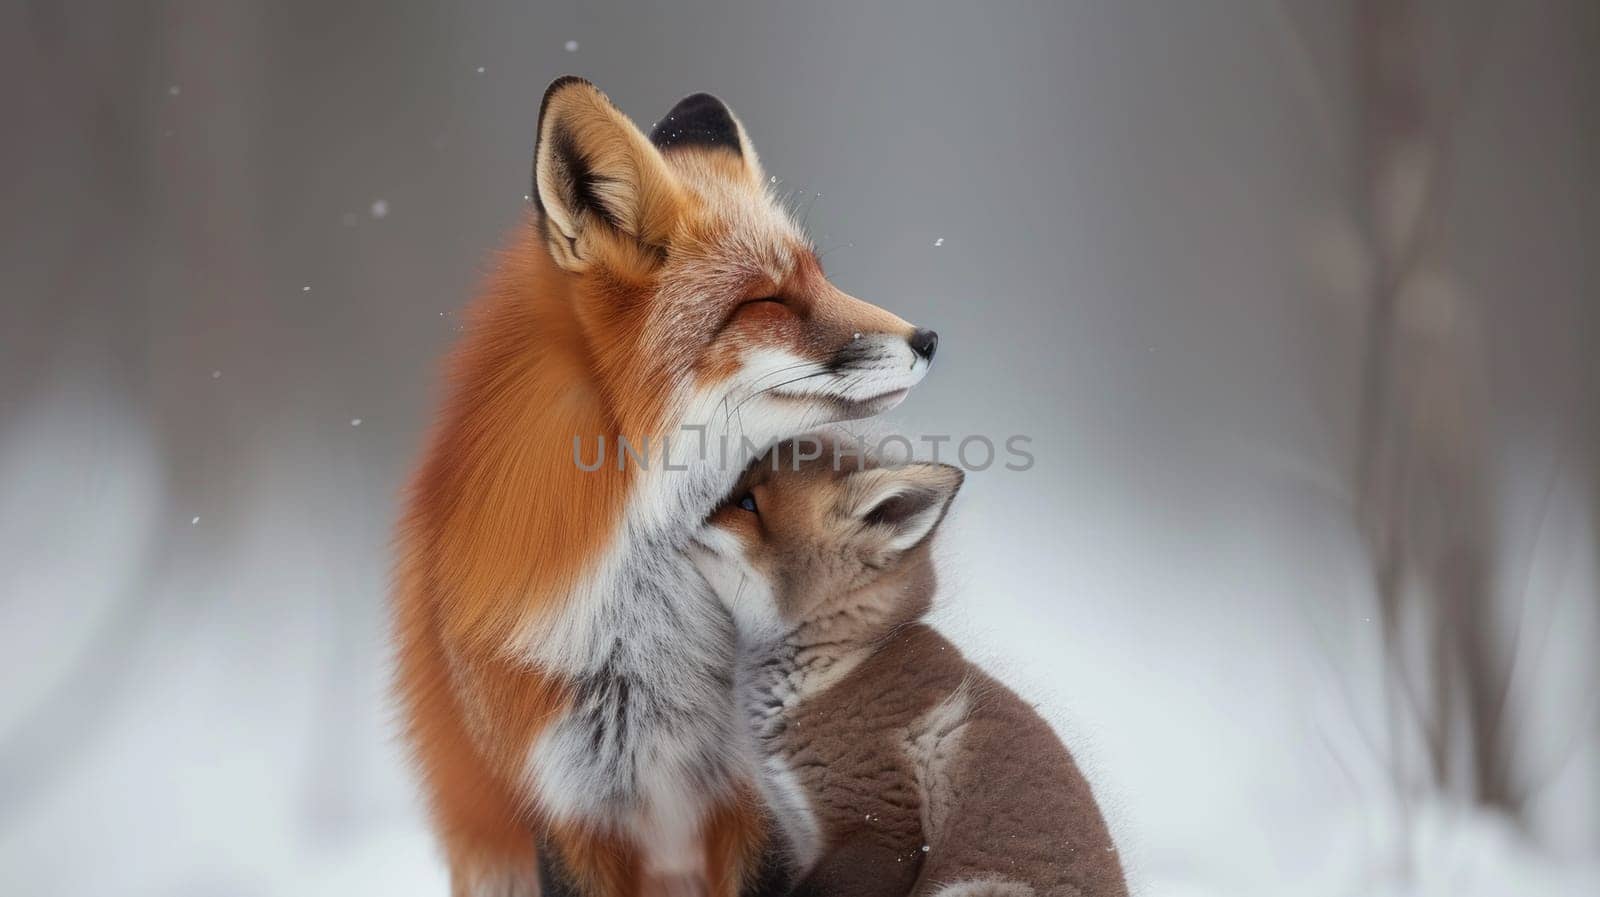 A fox and a baby are cuddling in the snow